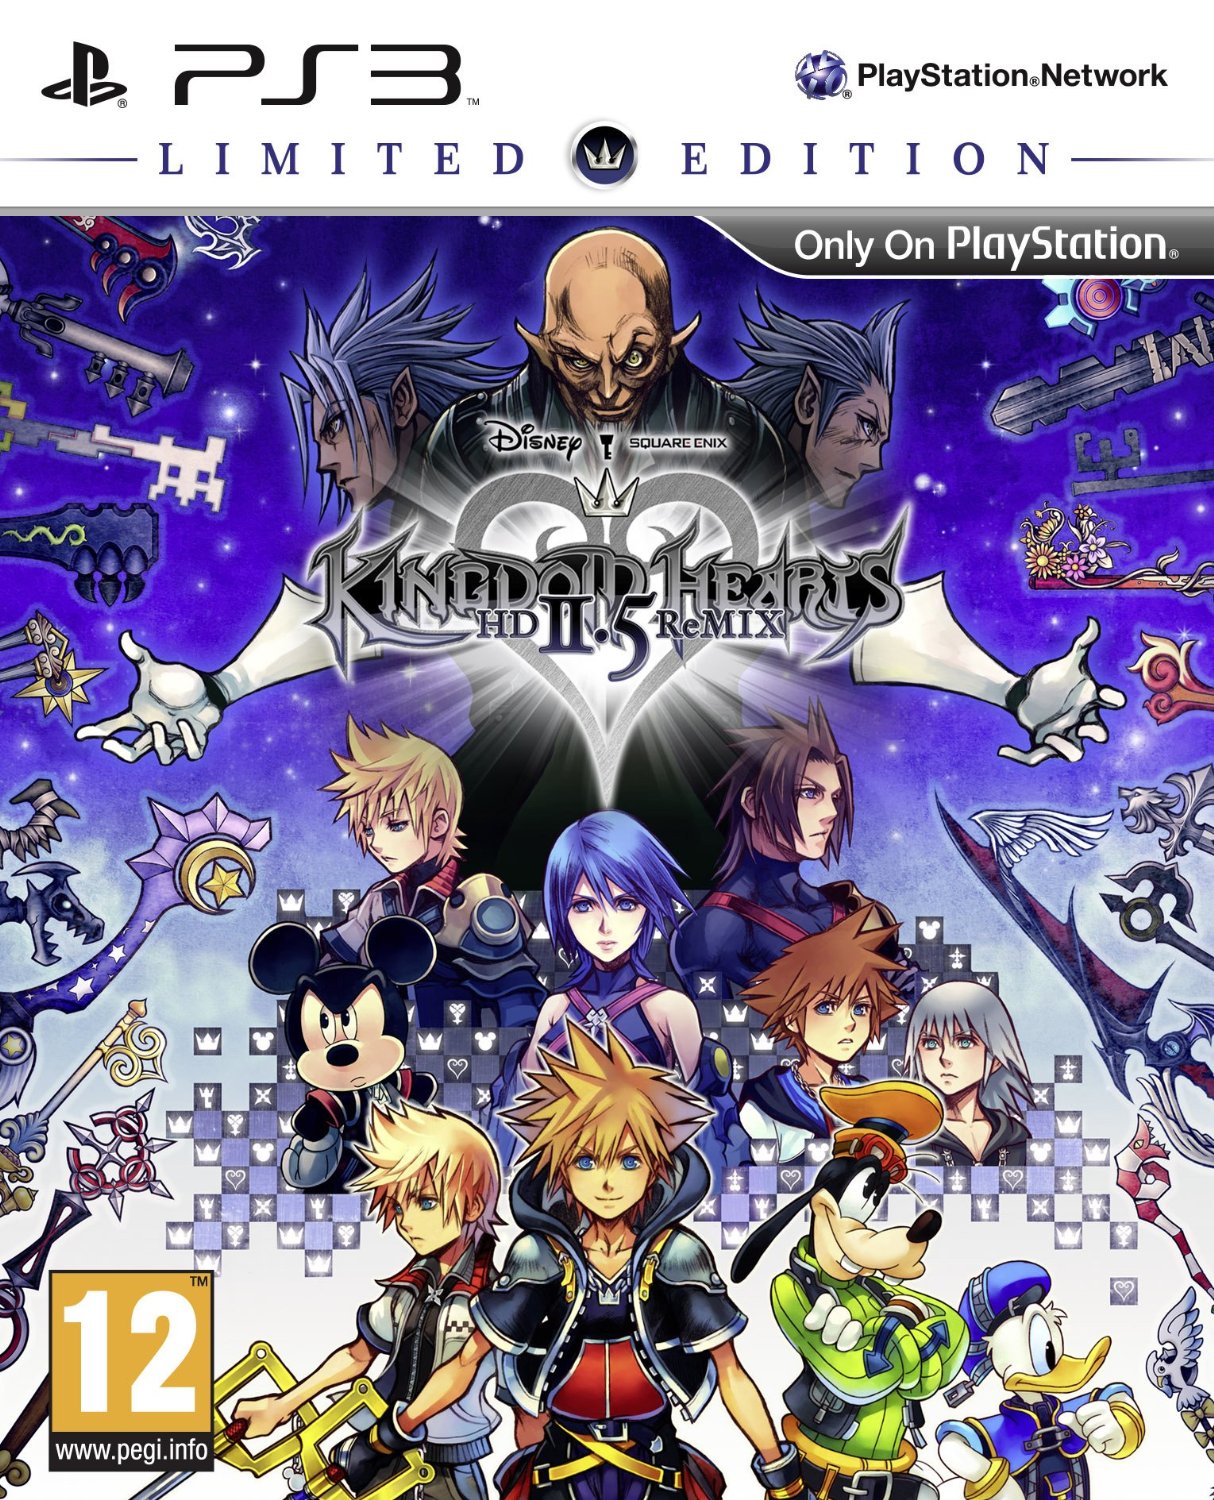 kh_hd_25_limited_edition_boxart